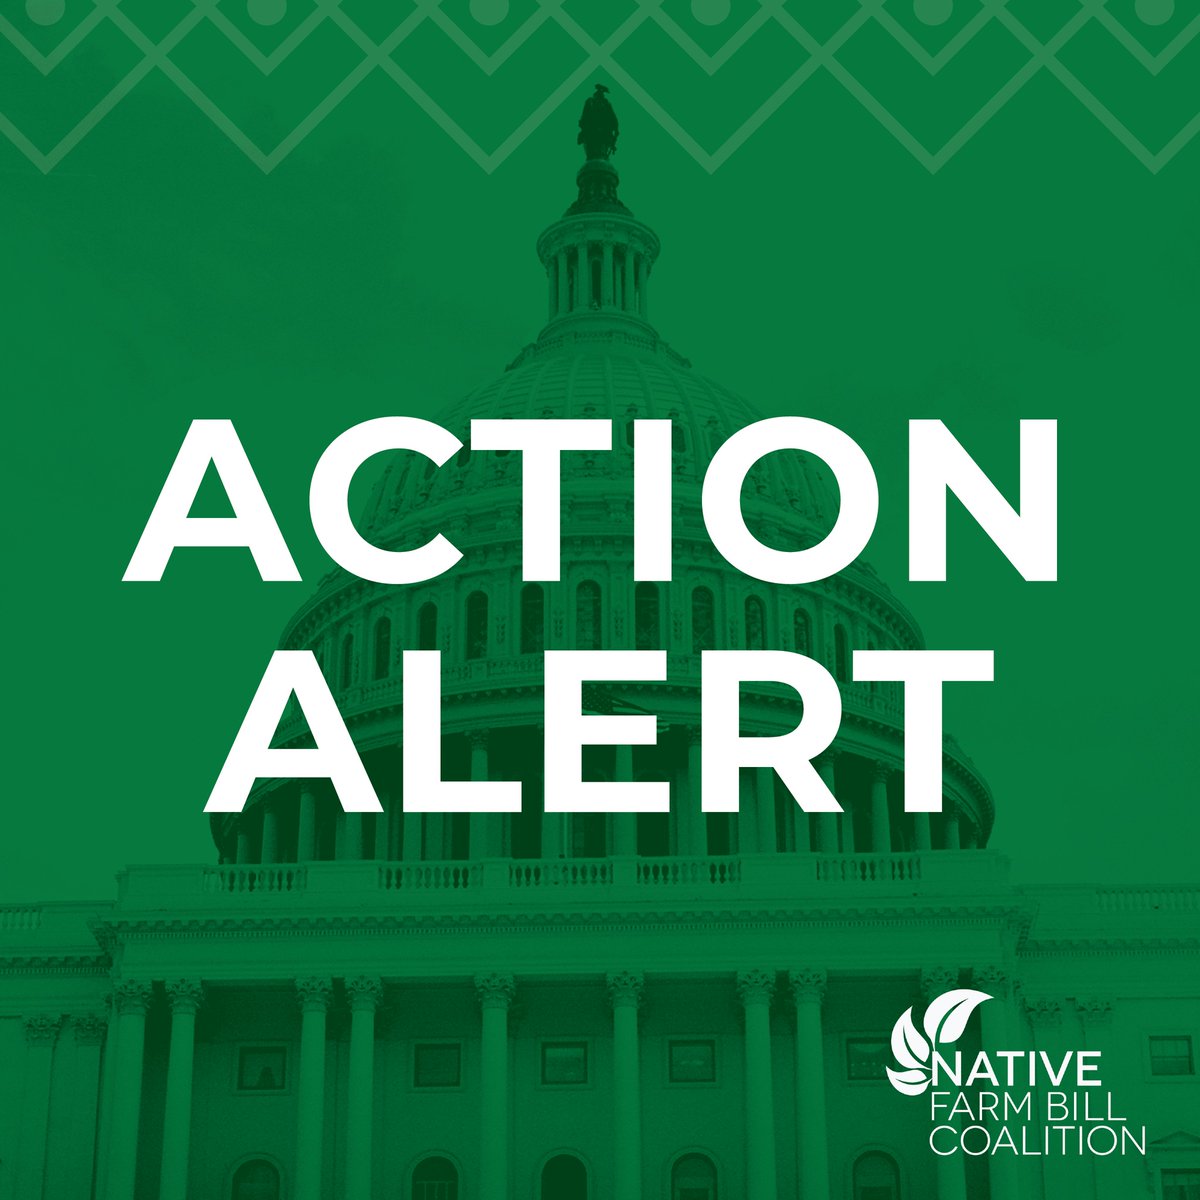 We need your support! This week is the last chance to urge Congress staffers to expand the Buy Indian Act to the USDA in the next Farm Bill. Learn more: nativefarmbill.com/action-alerts